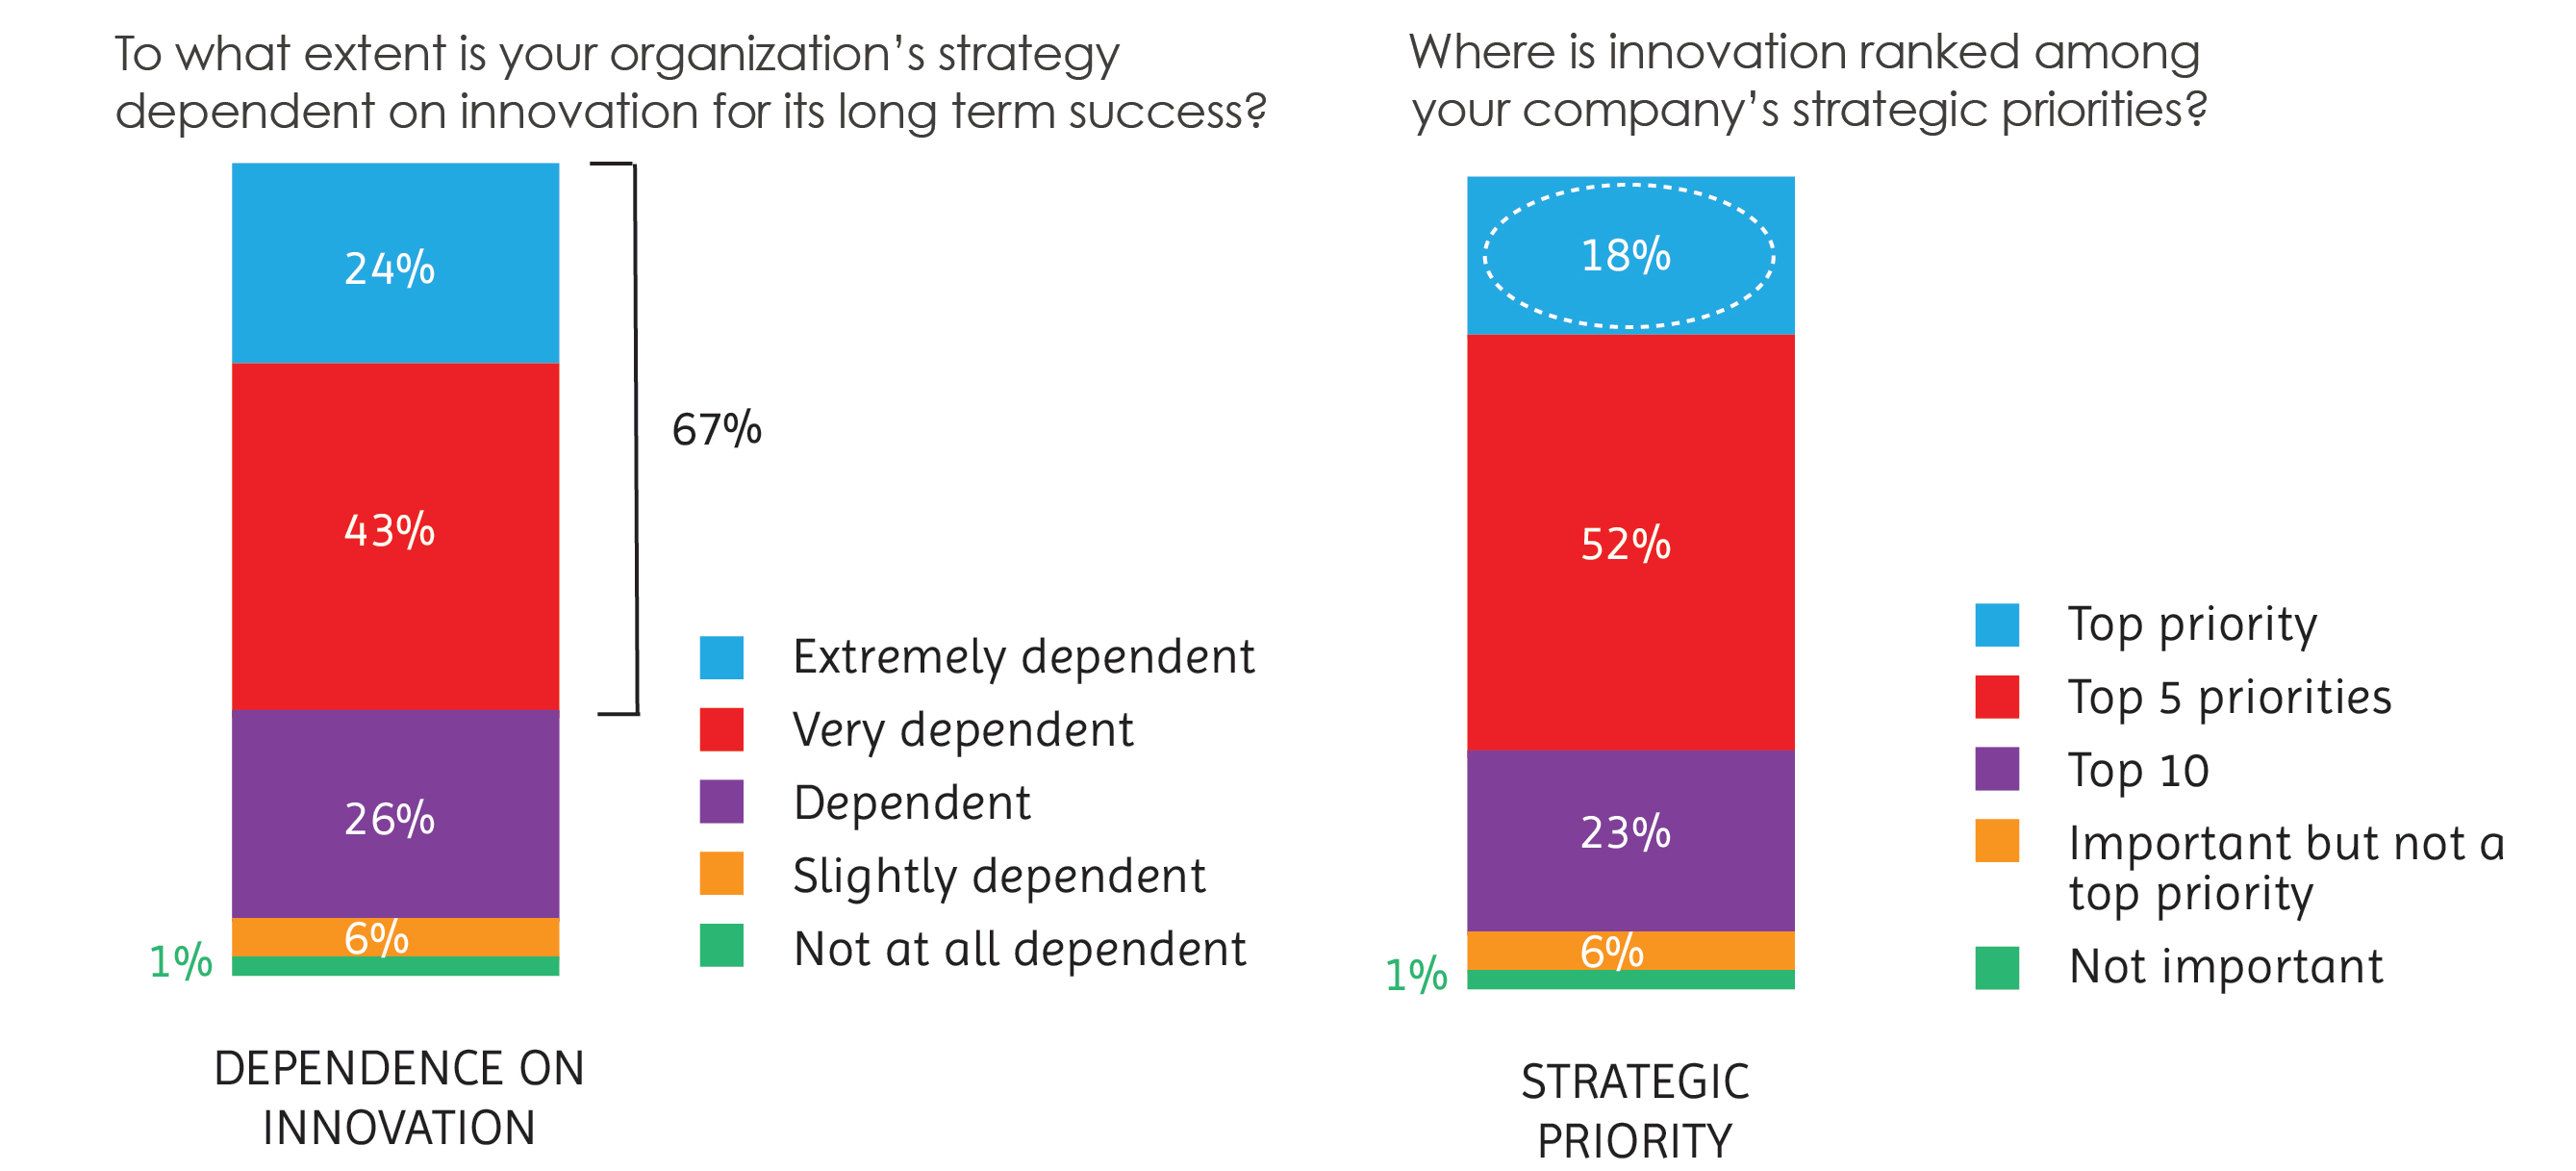 Source: “Why “Low Risk” Innovation Is Costly” By Wouter Koetzier and Adi Alon Copyright © 2013 Accenture